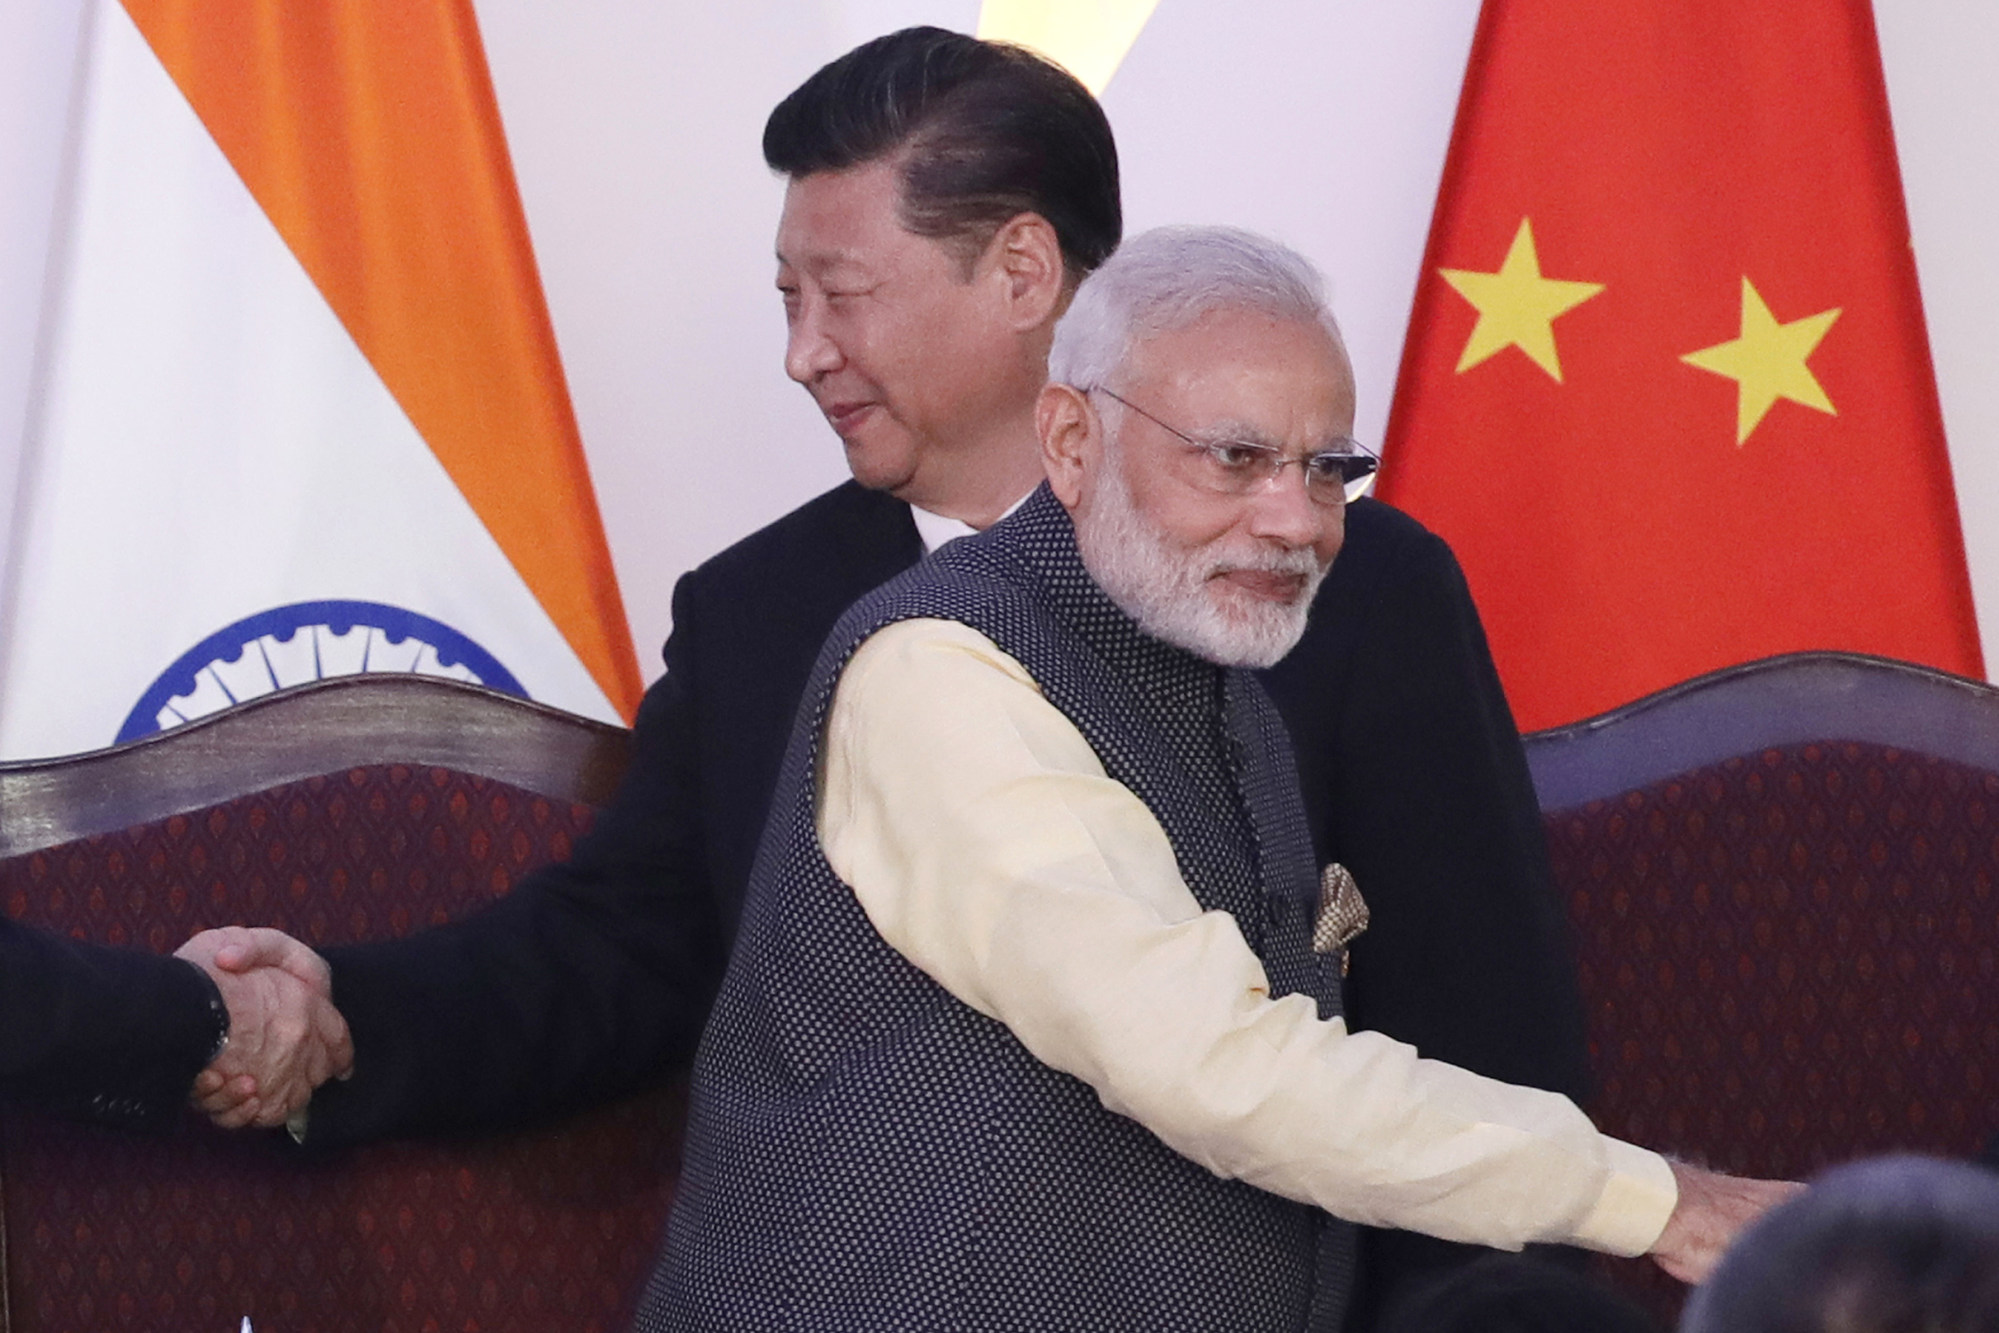 Chinese President Xi Jinping and Indian Prime Minister Narendra Modi shake hands with other leaders at the 2016 BRICS summit in Goa, India. Photo: AP